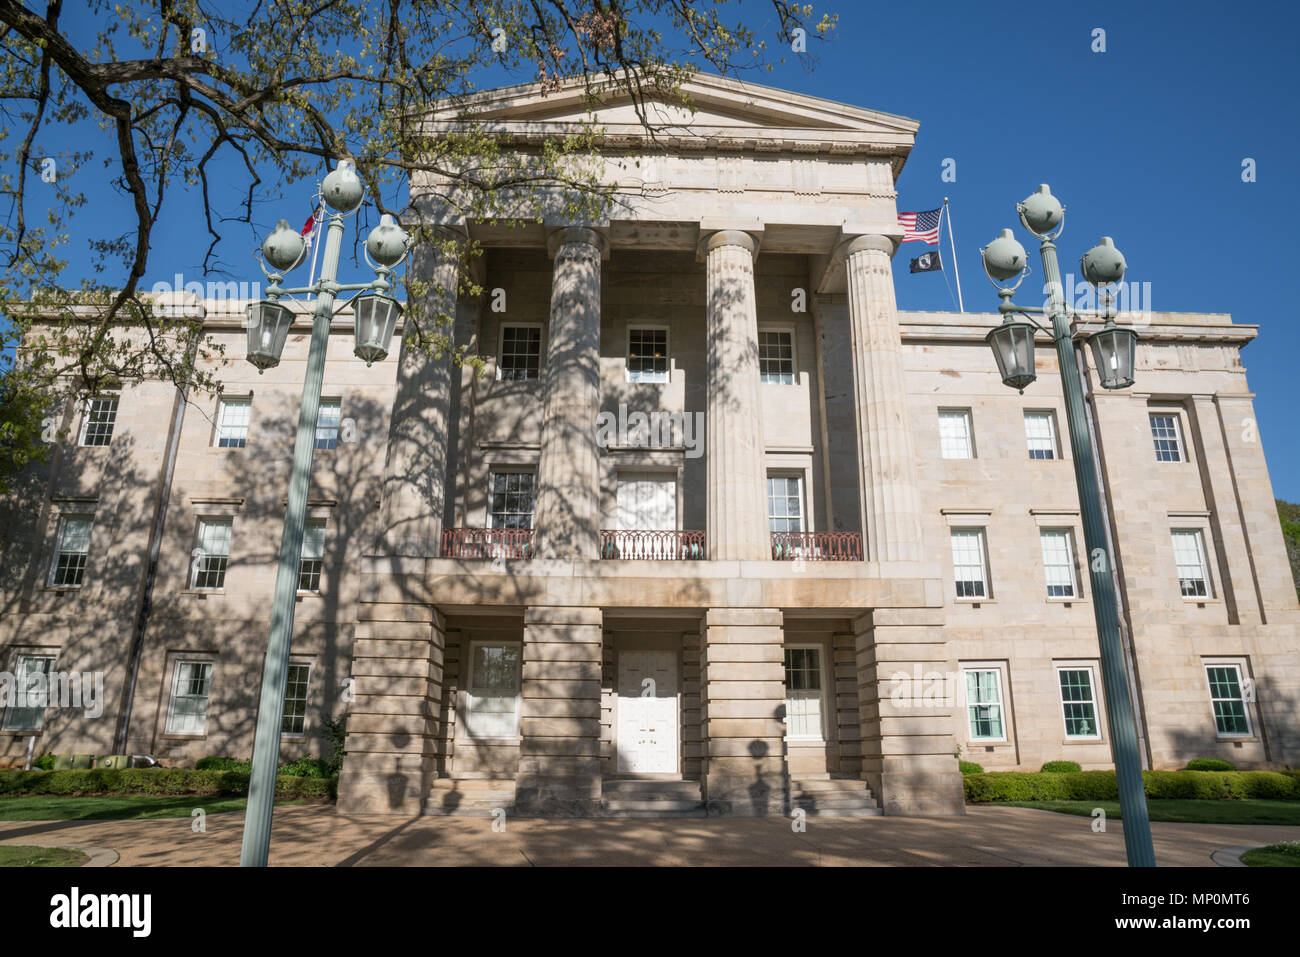 North Carolina Capitol Building in Raleigh Foto Stock